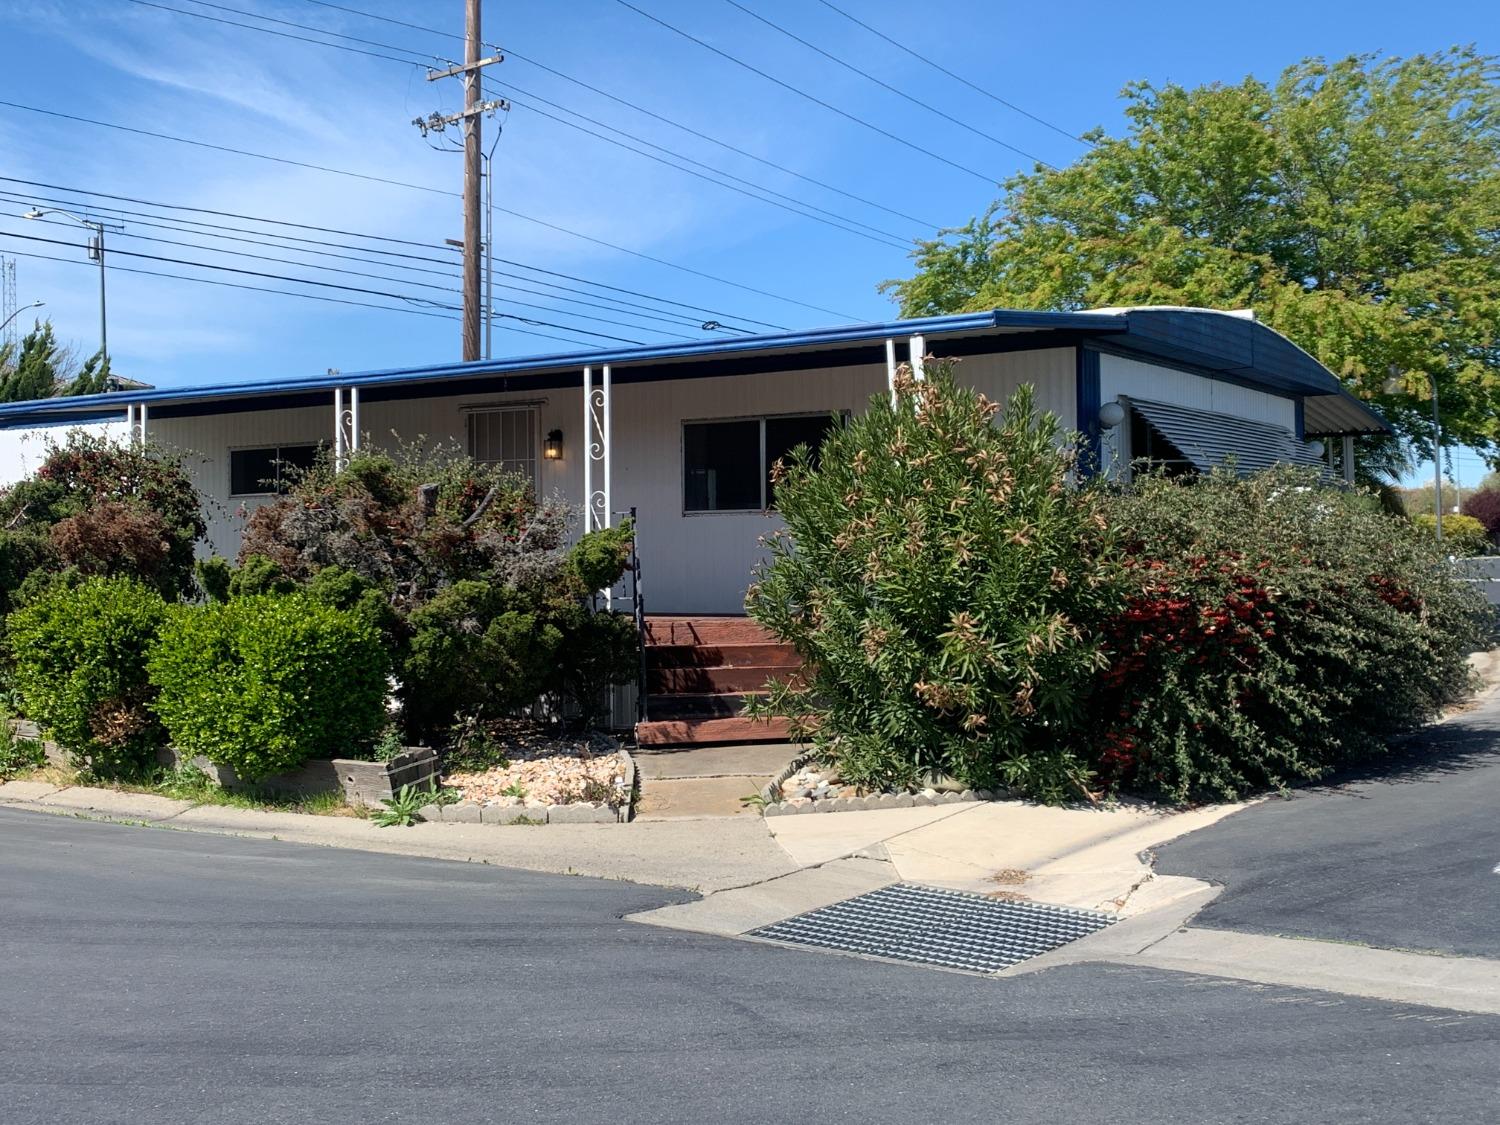 Photo of 4211 Brookside Dr #153 in Sacramento, CA